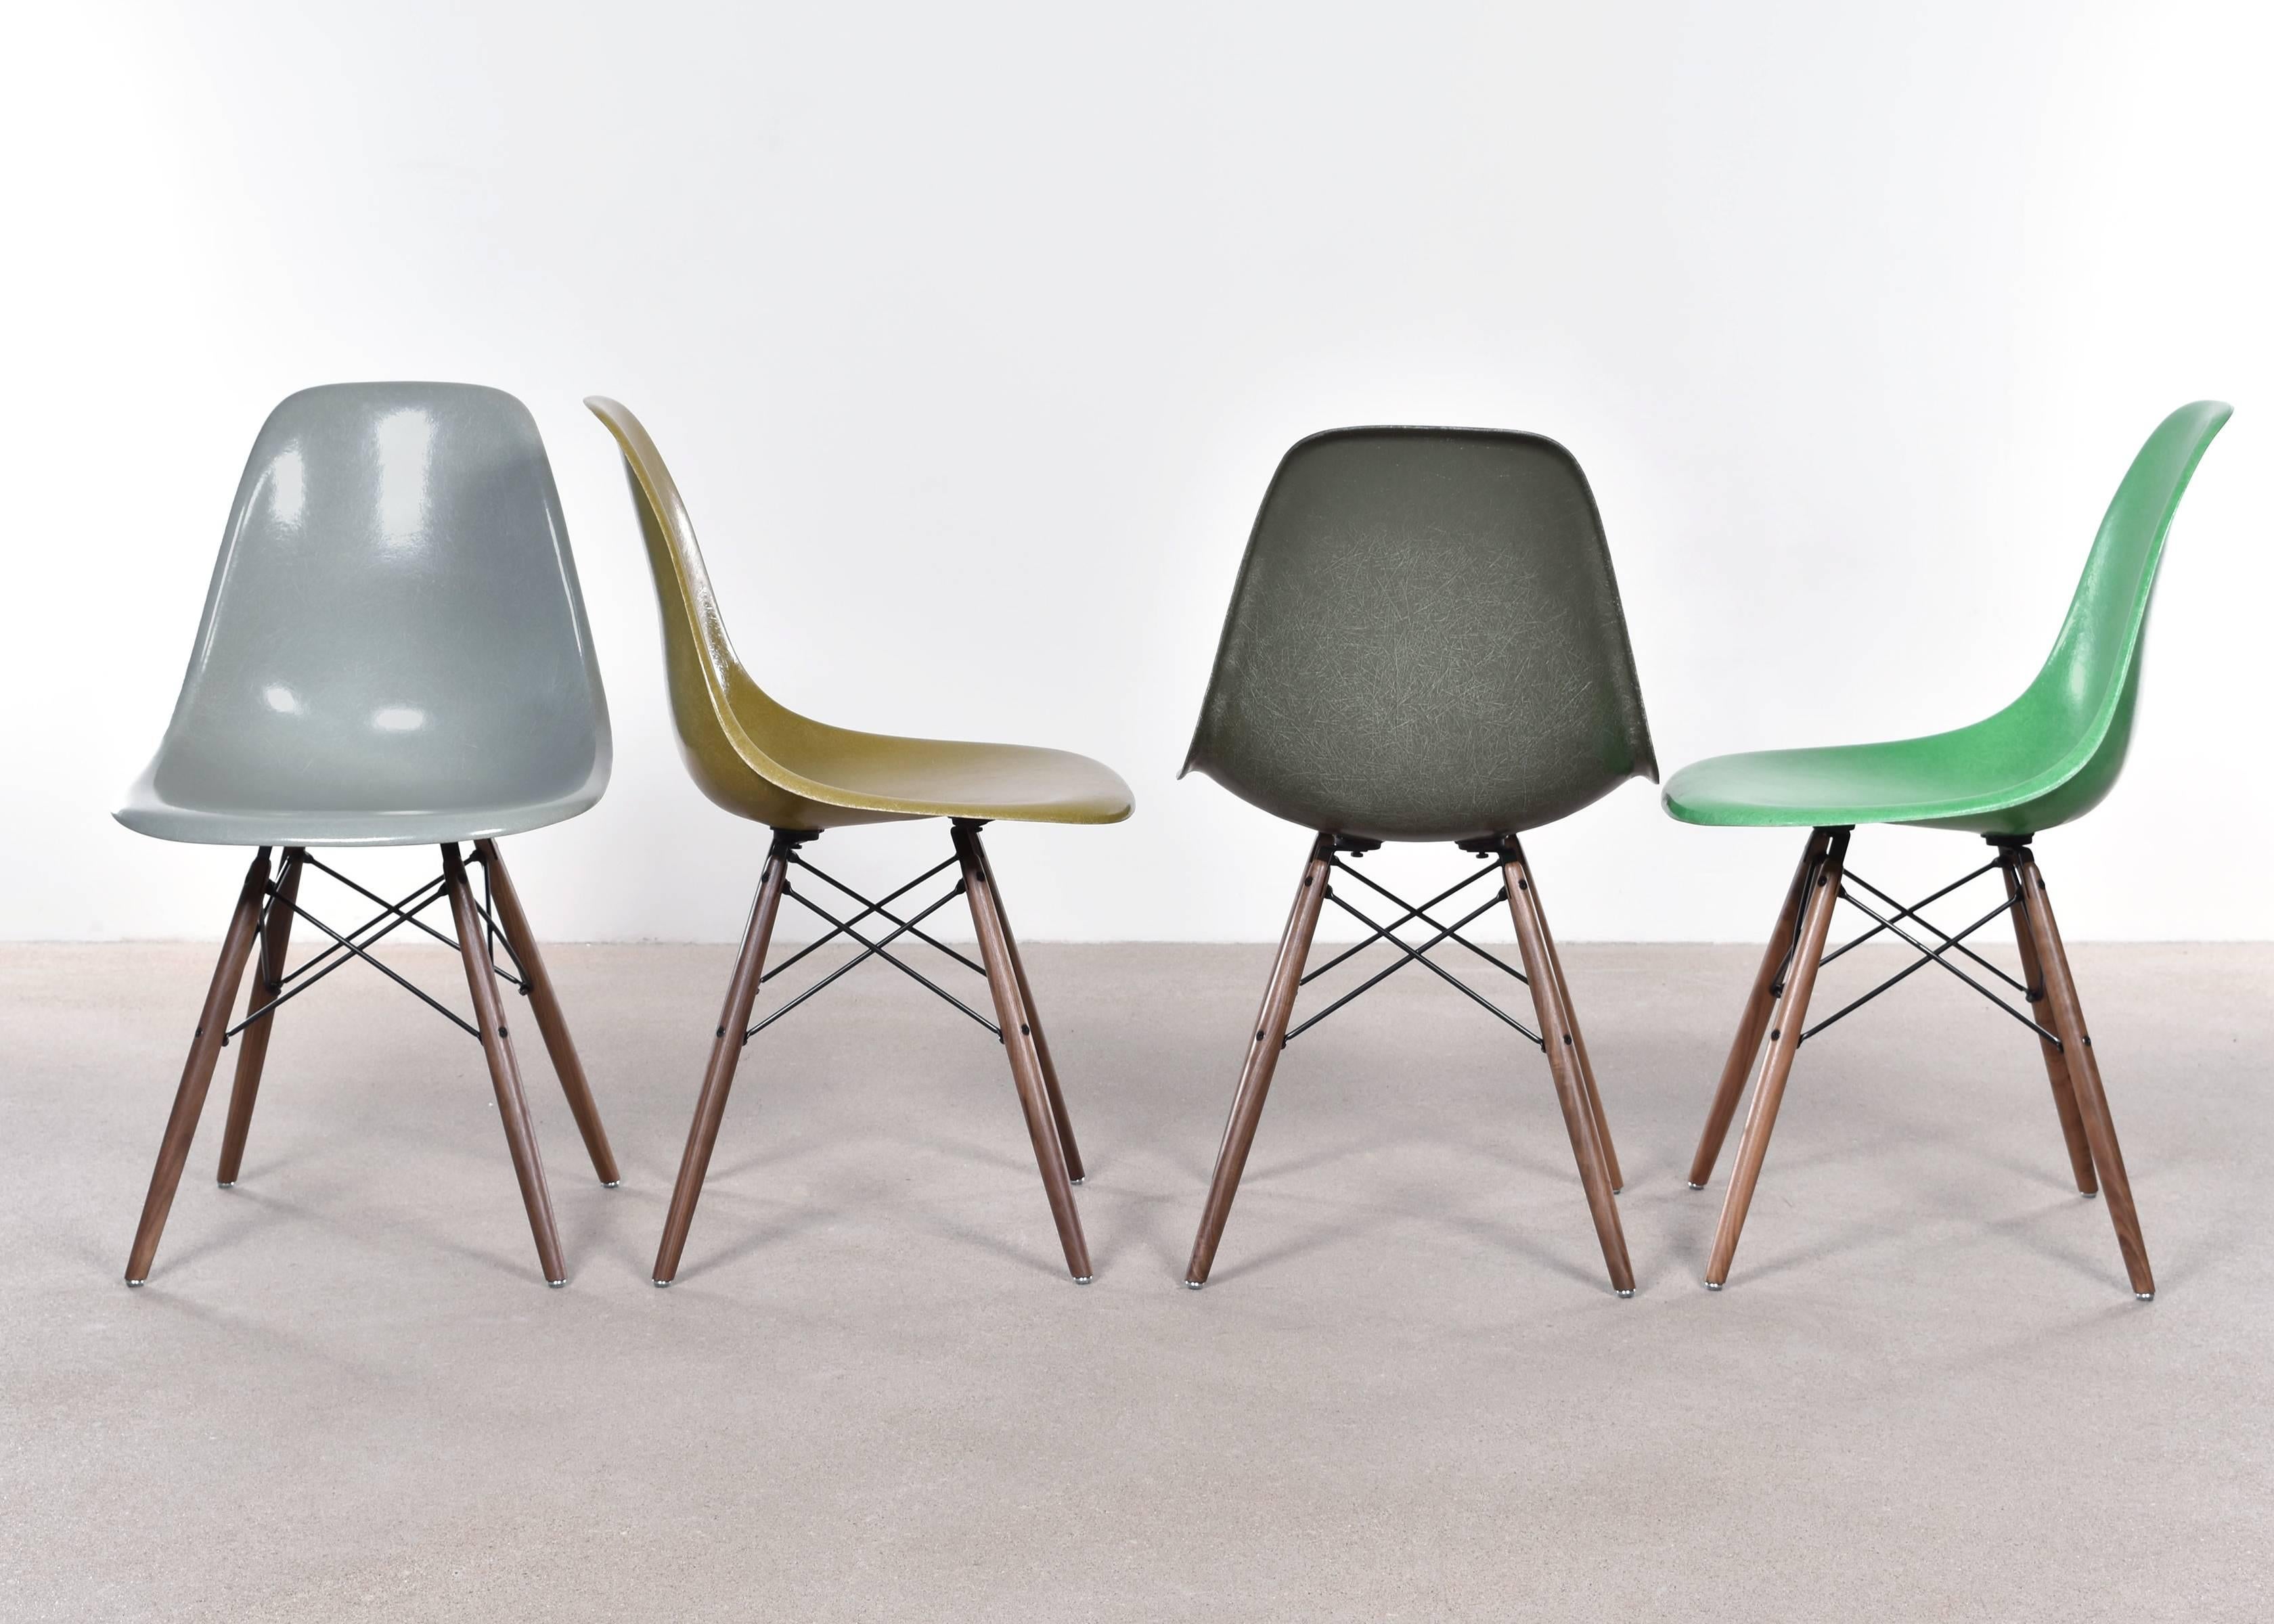 Beautiful iconic DSW chairs in the colors: Kelly green, olive green dark, mustard and sea foam green. Shells are in very good or excellent condition with only slight traces of use. Replaced shock mounts which guarantee save usability for the next